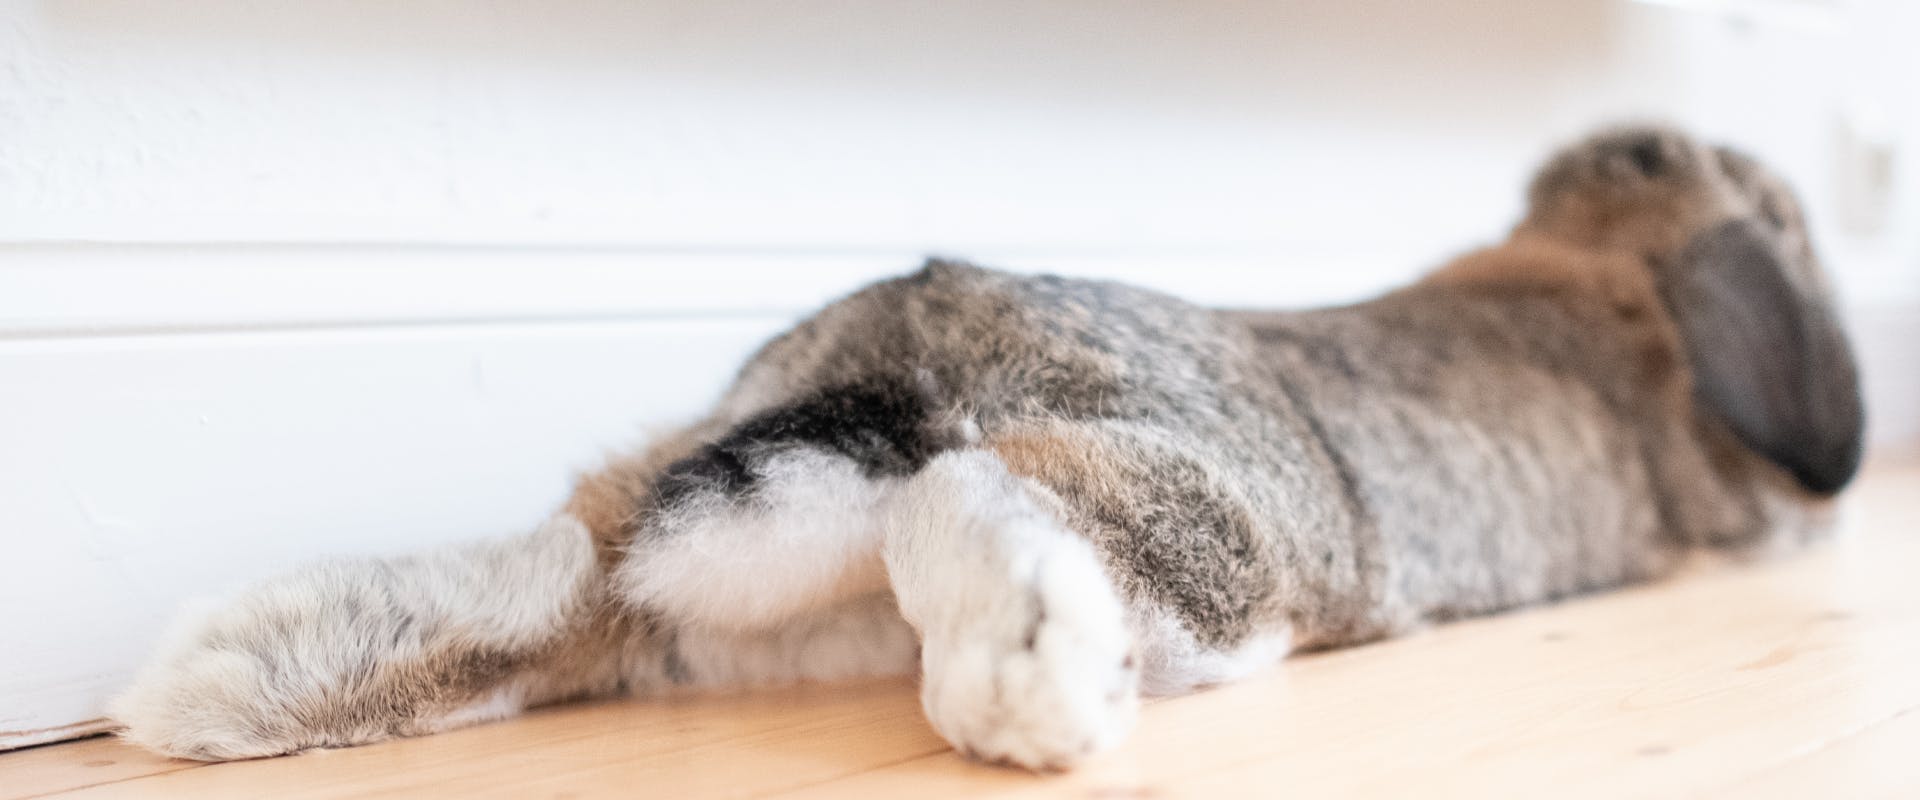 a large lop-eared bunny lying on a wooden floor facing away from the camera with its back legs sticking out